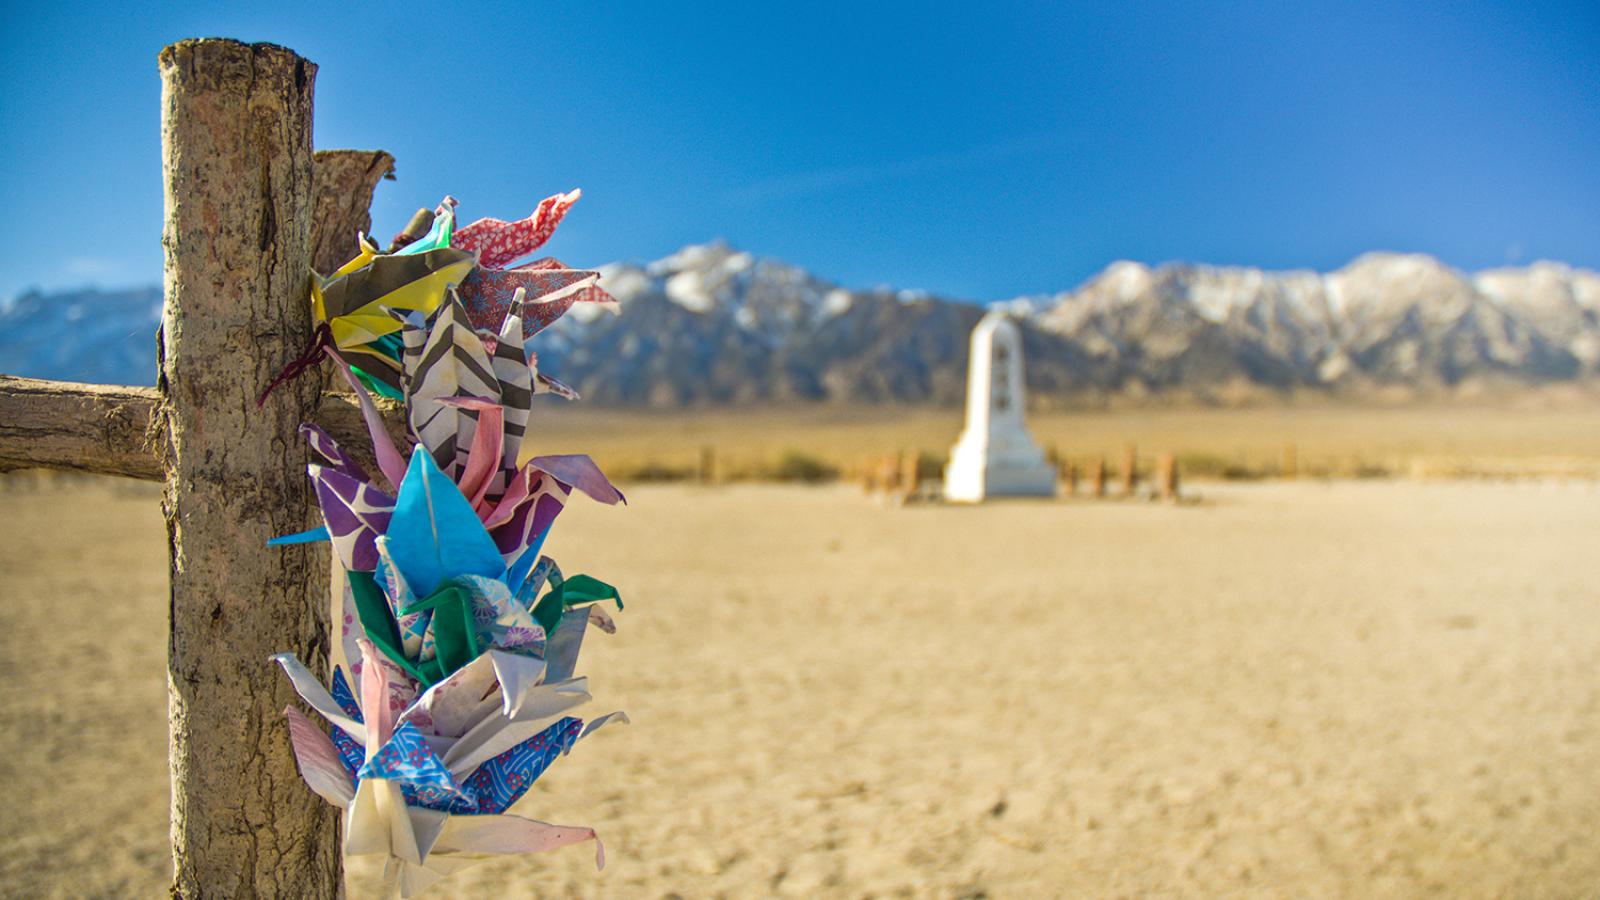 Manzanar monument with origami cranes in foreground and snow-capped mountains in background